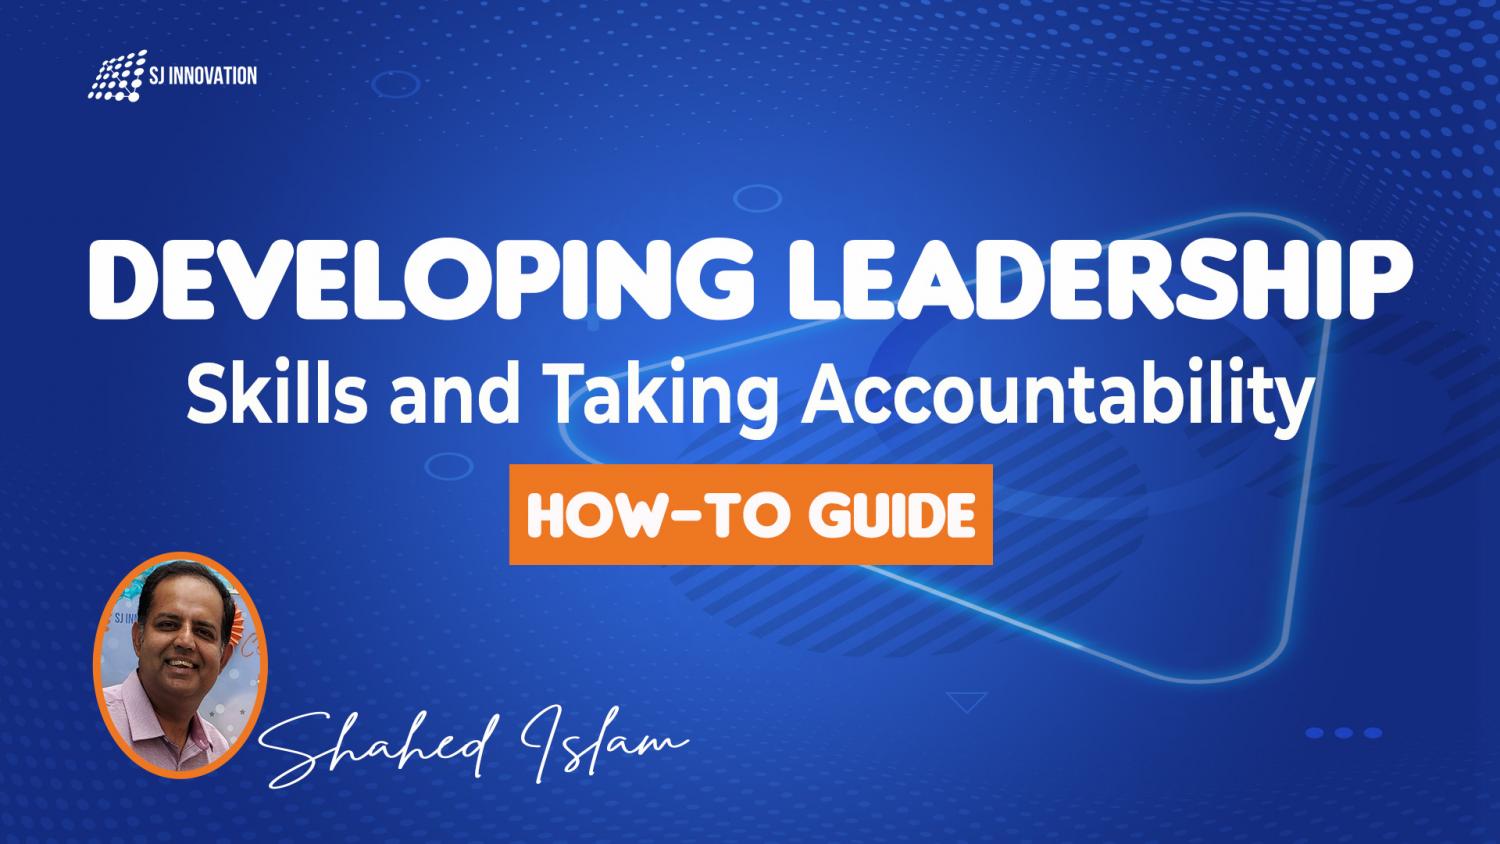 Developing Leadership Skills and Taking Accountability: How-to Guide